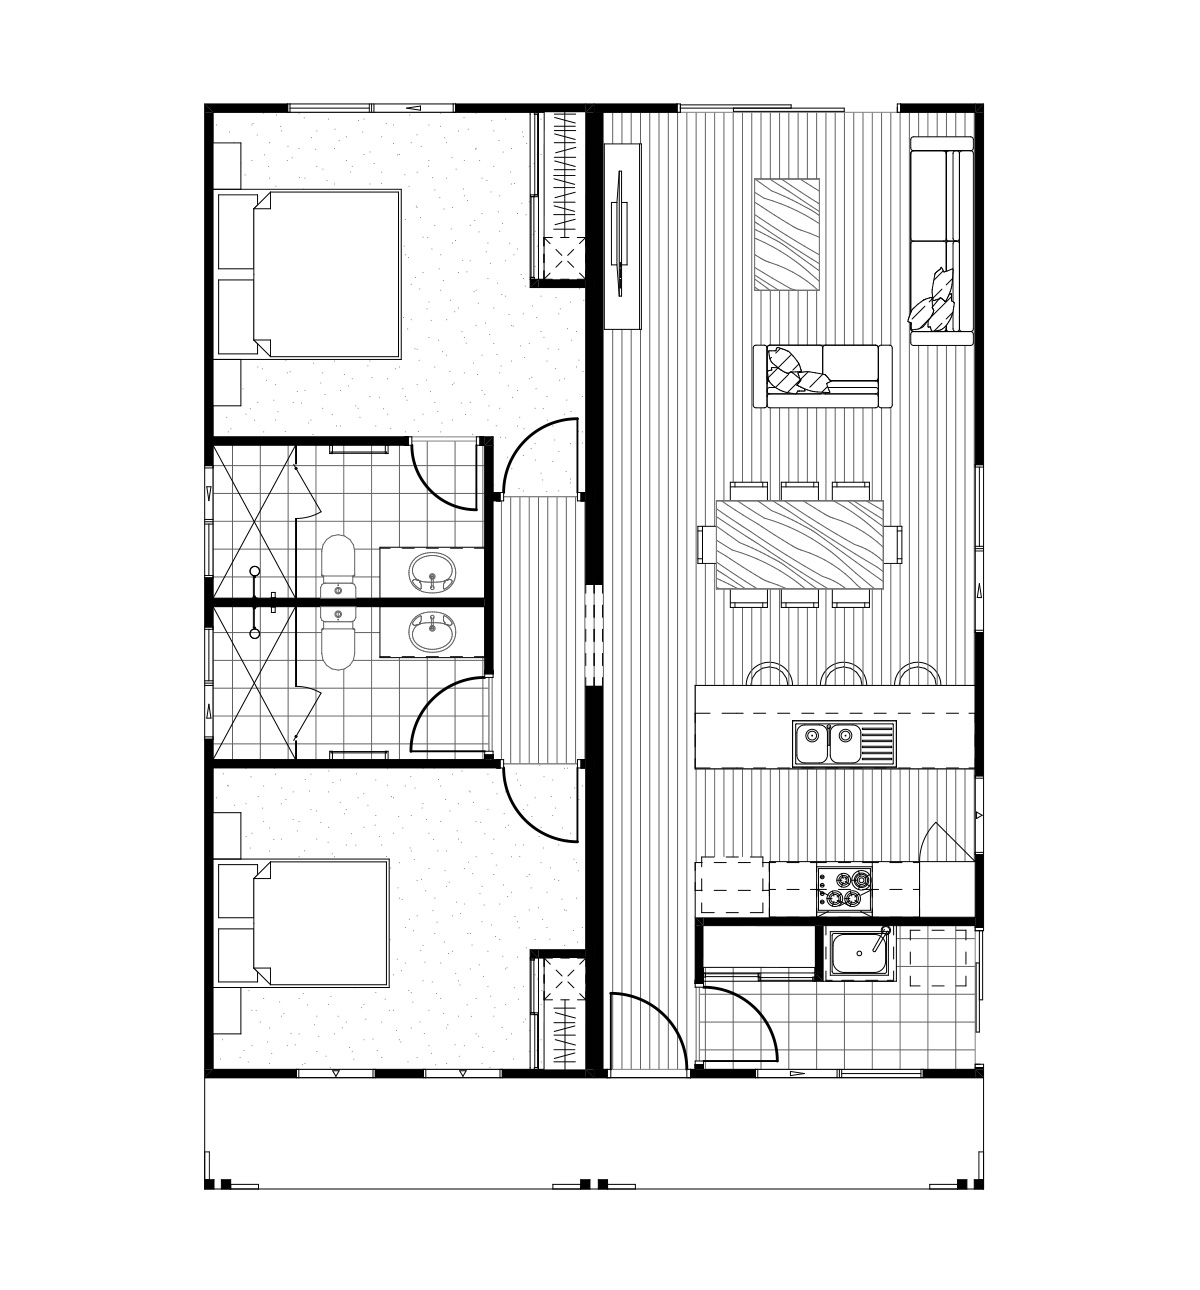 The Strathmore floorplan accommodates 2 bedrooms and 2 bathrooms